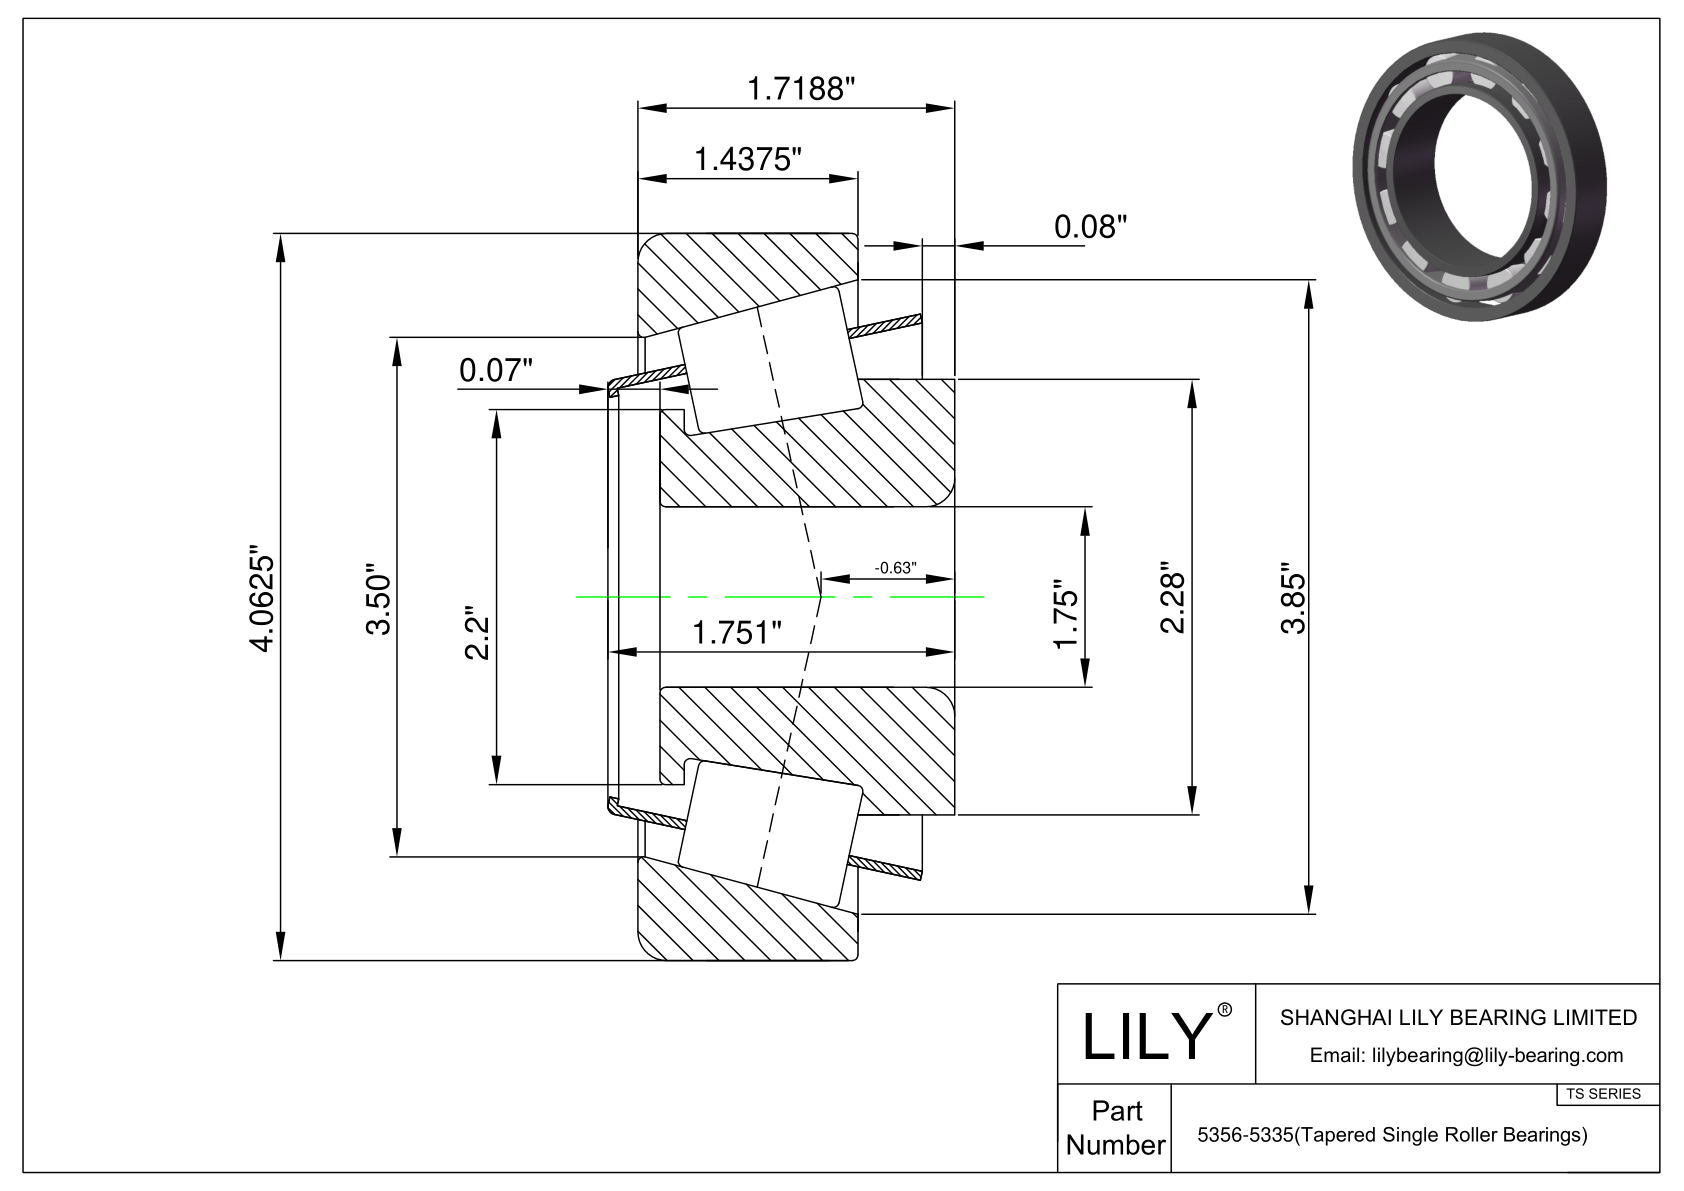 5356-5335 TS (Tapered Single Roller Bearings) (Imperial) cad drawing